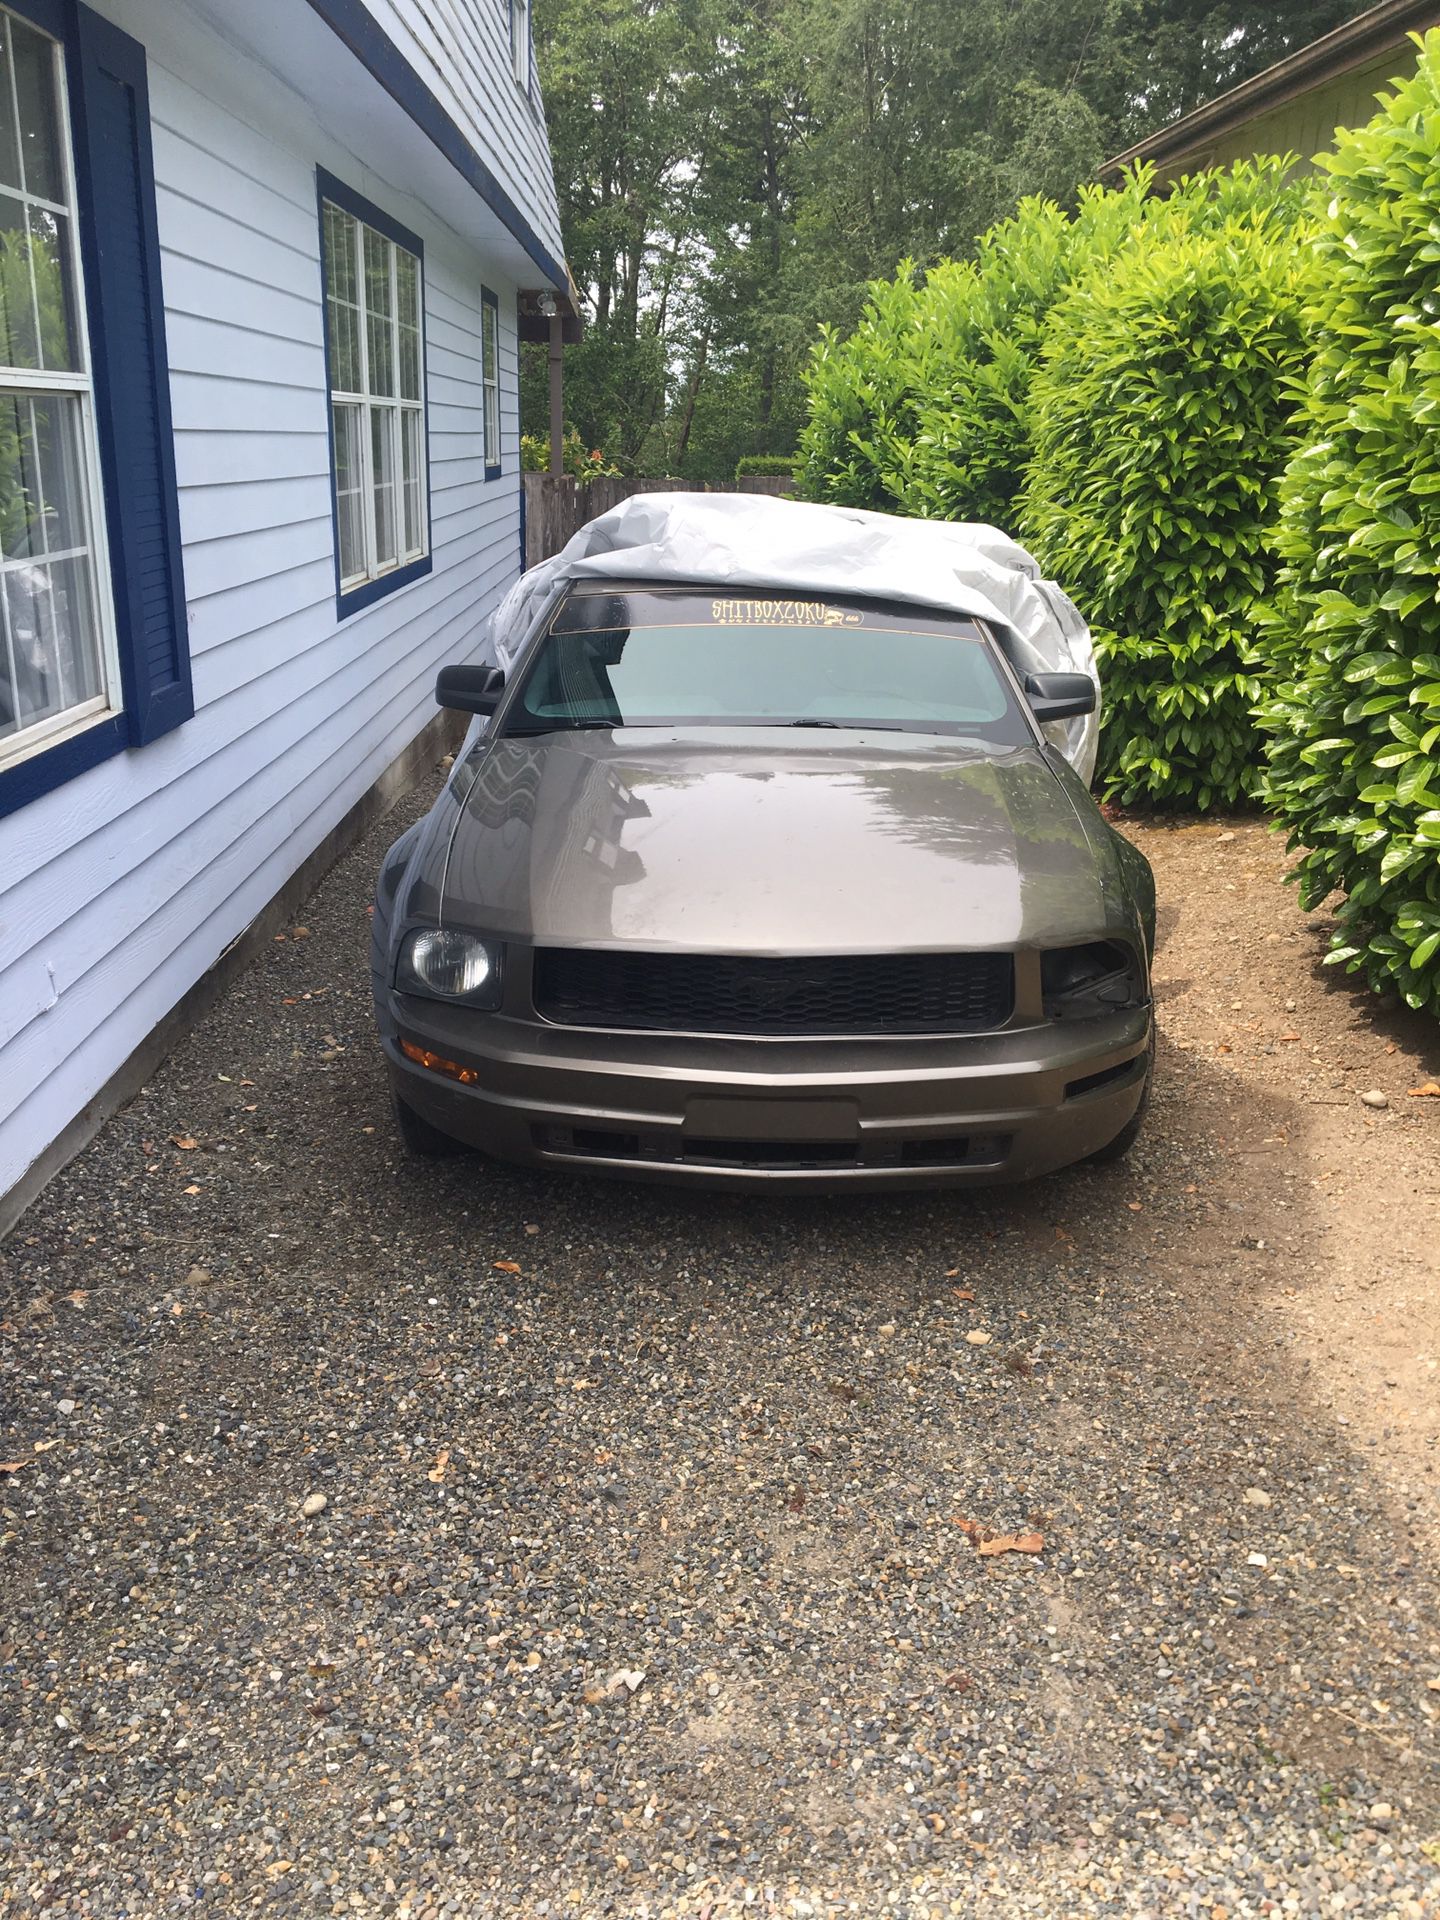 2005 Mustang For Parts